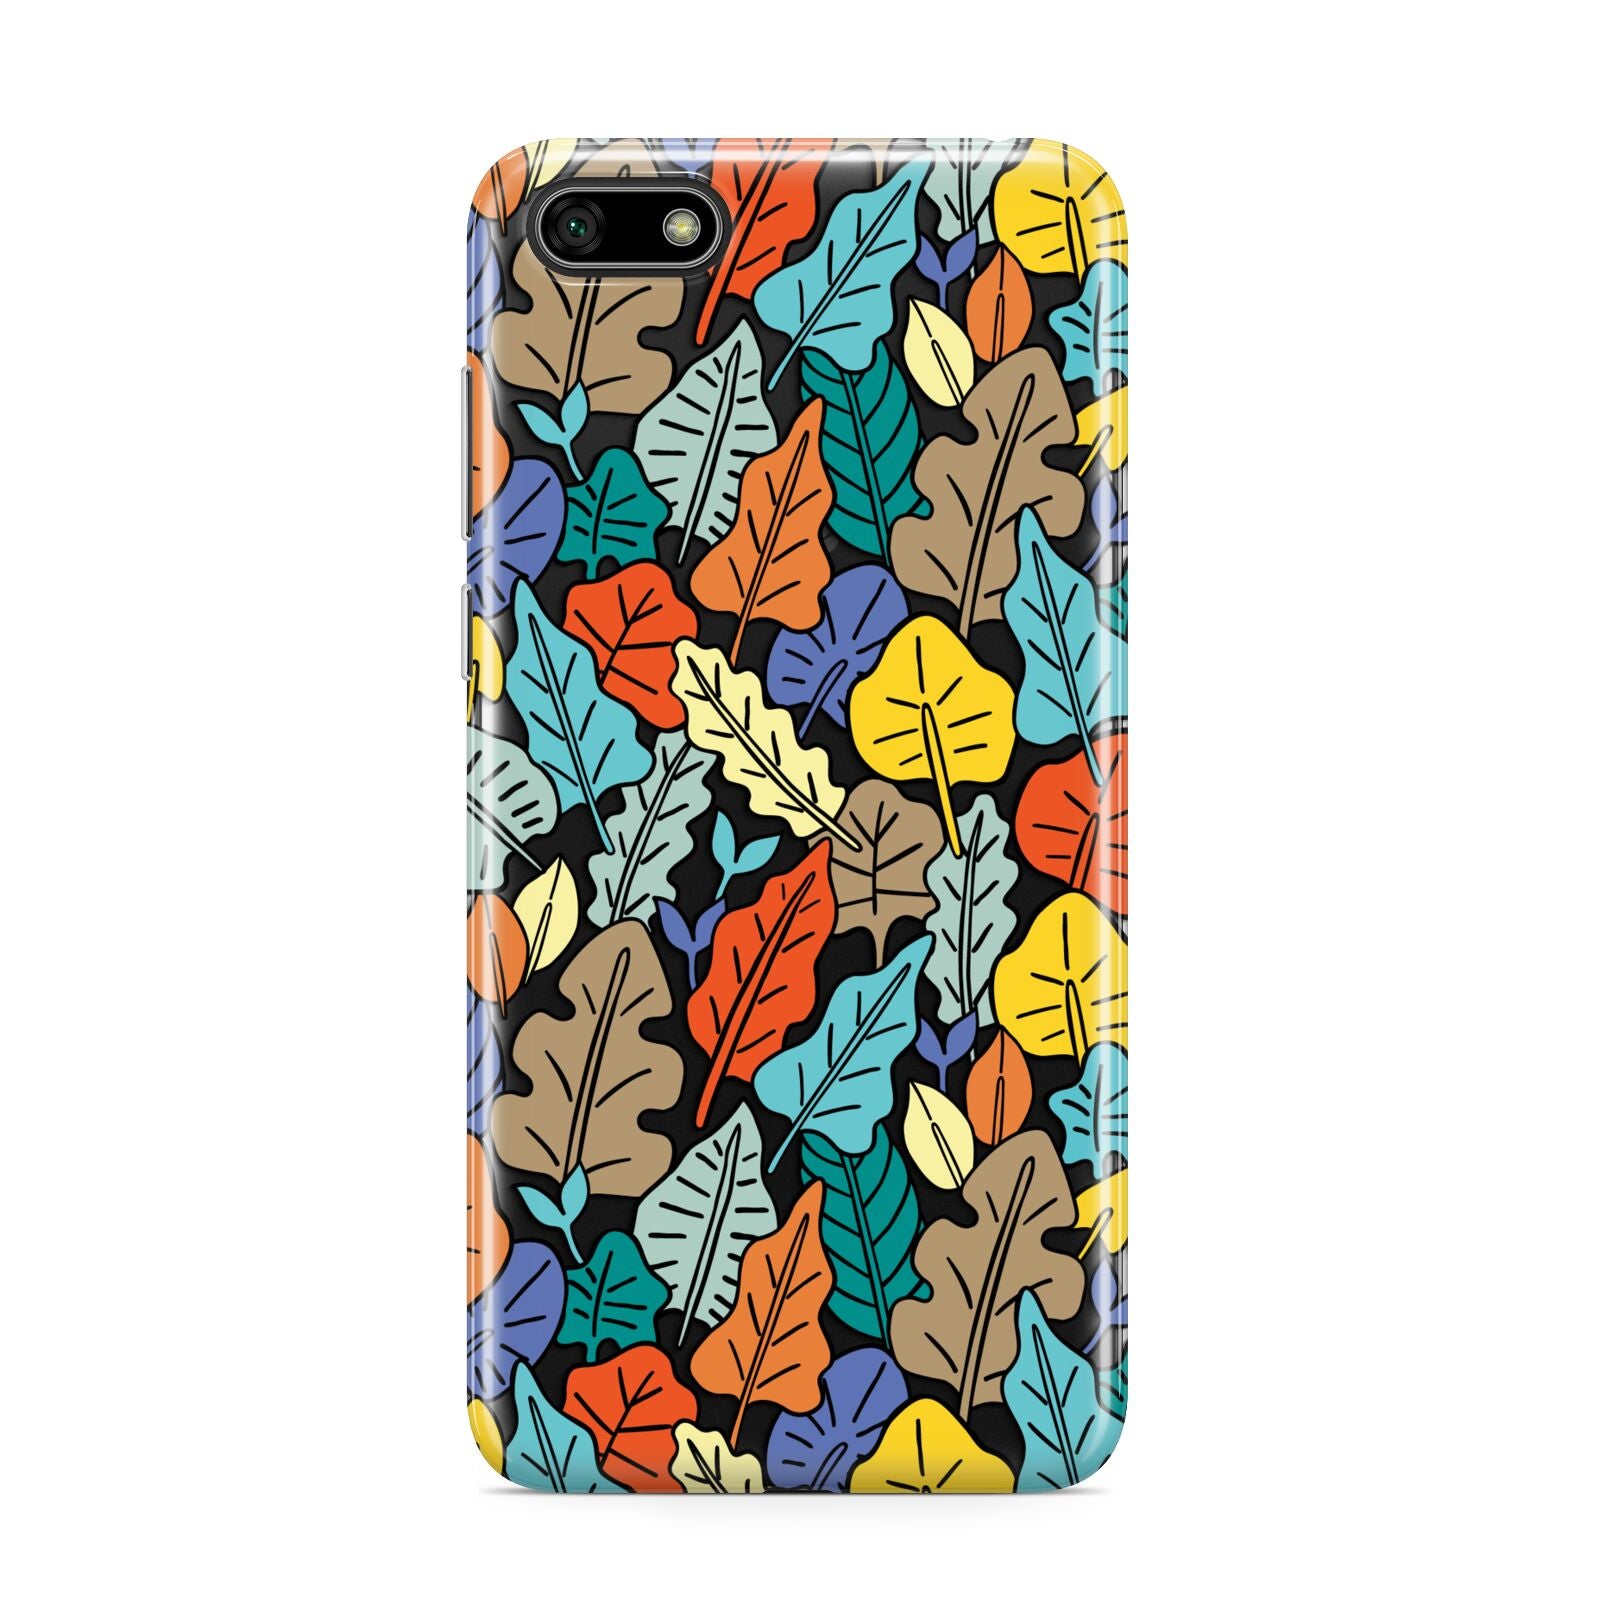 Autumn Leaves Huawei Y5 Prime 2018 Phone Case